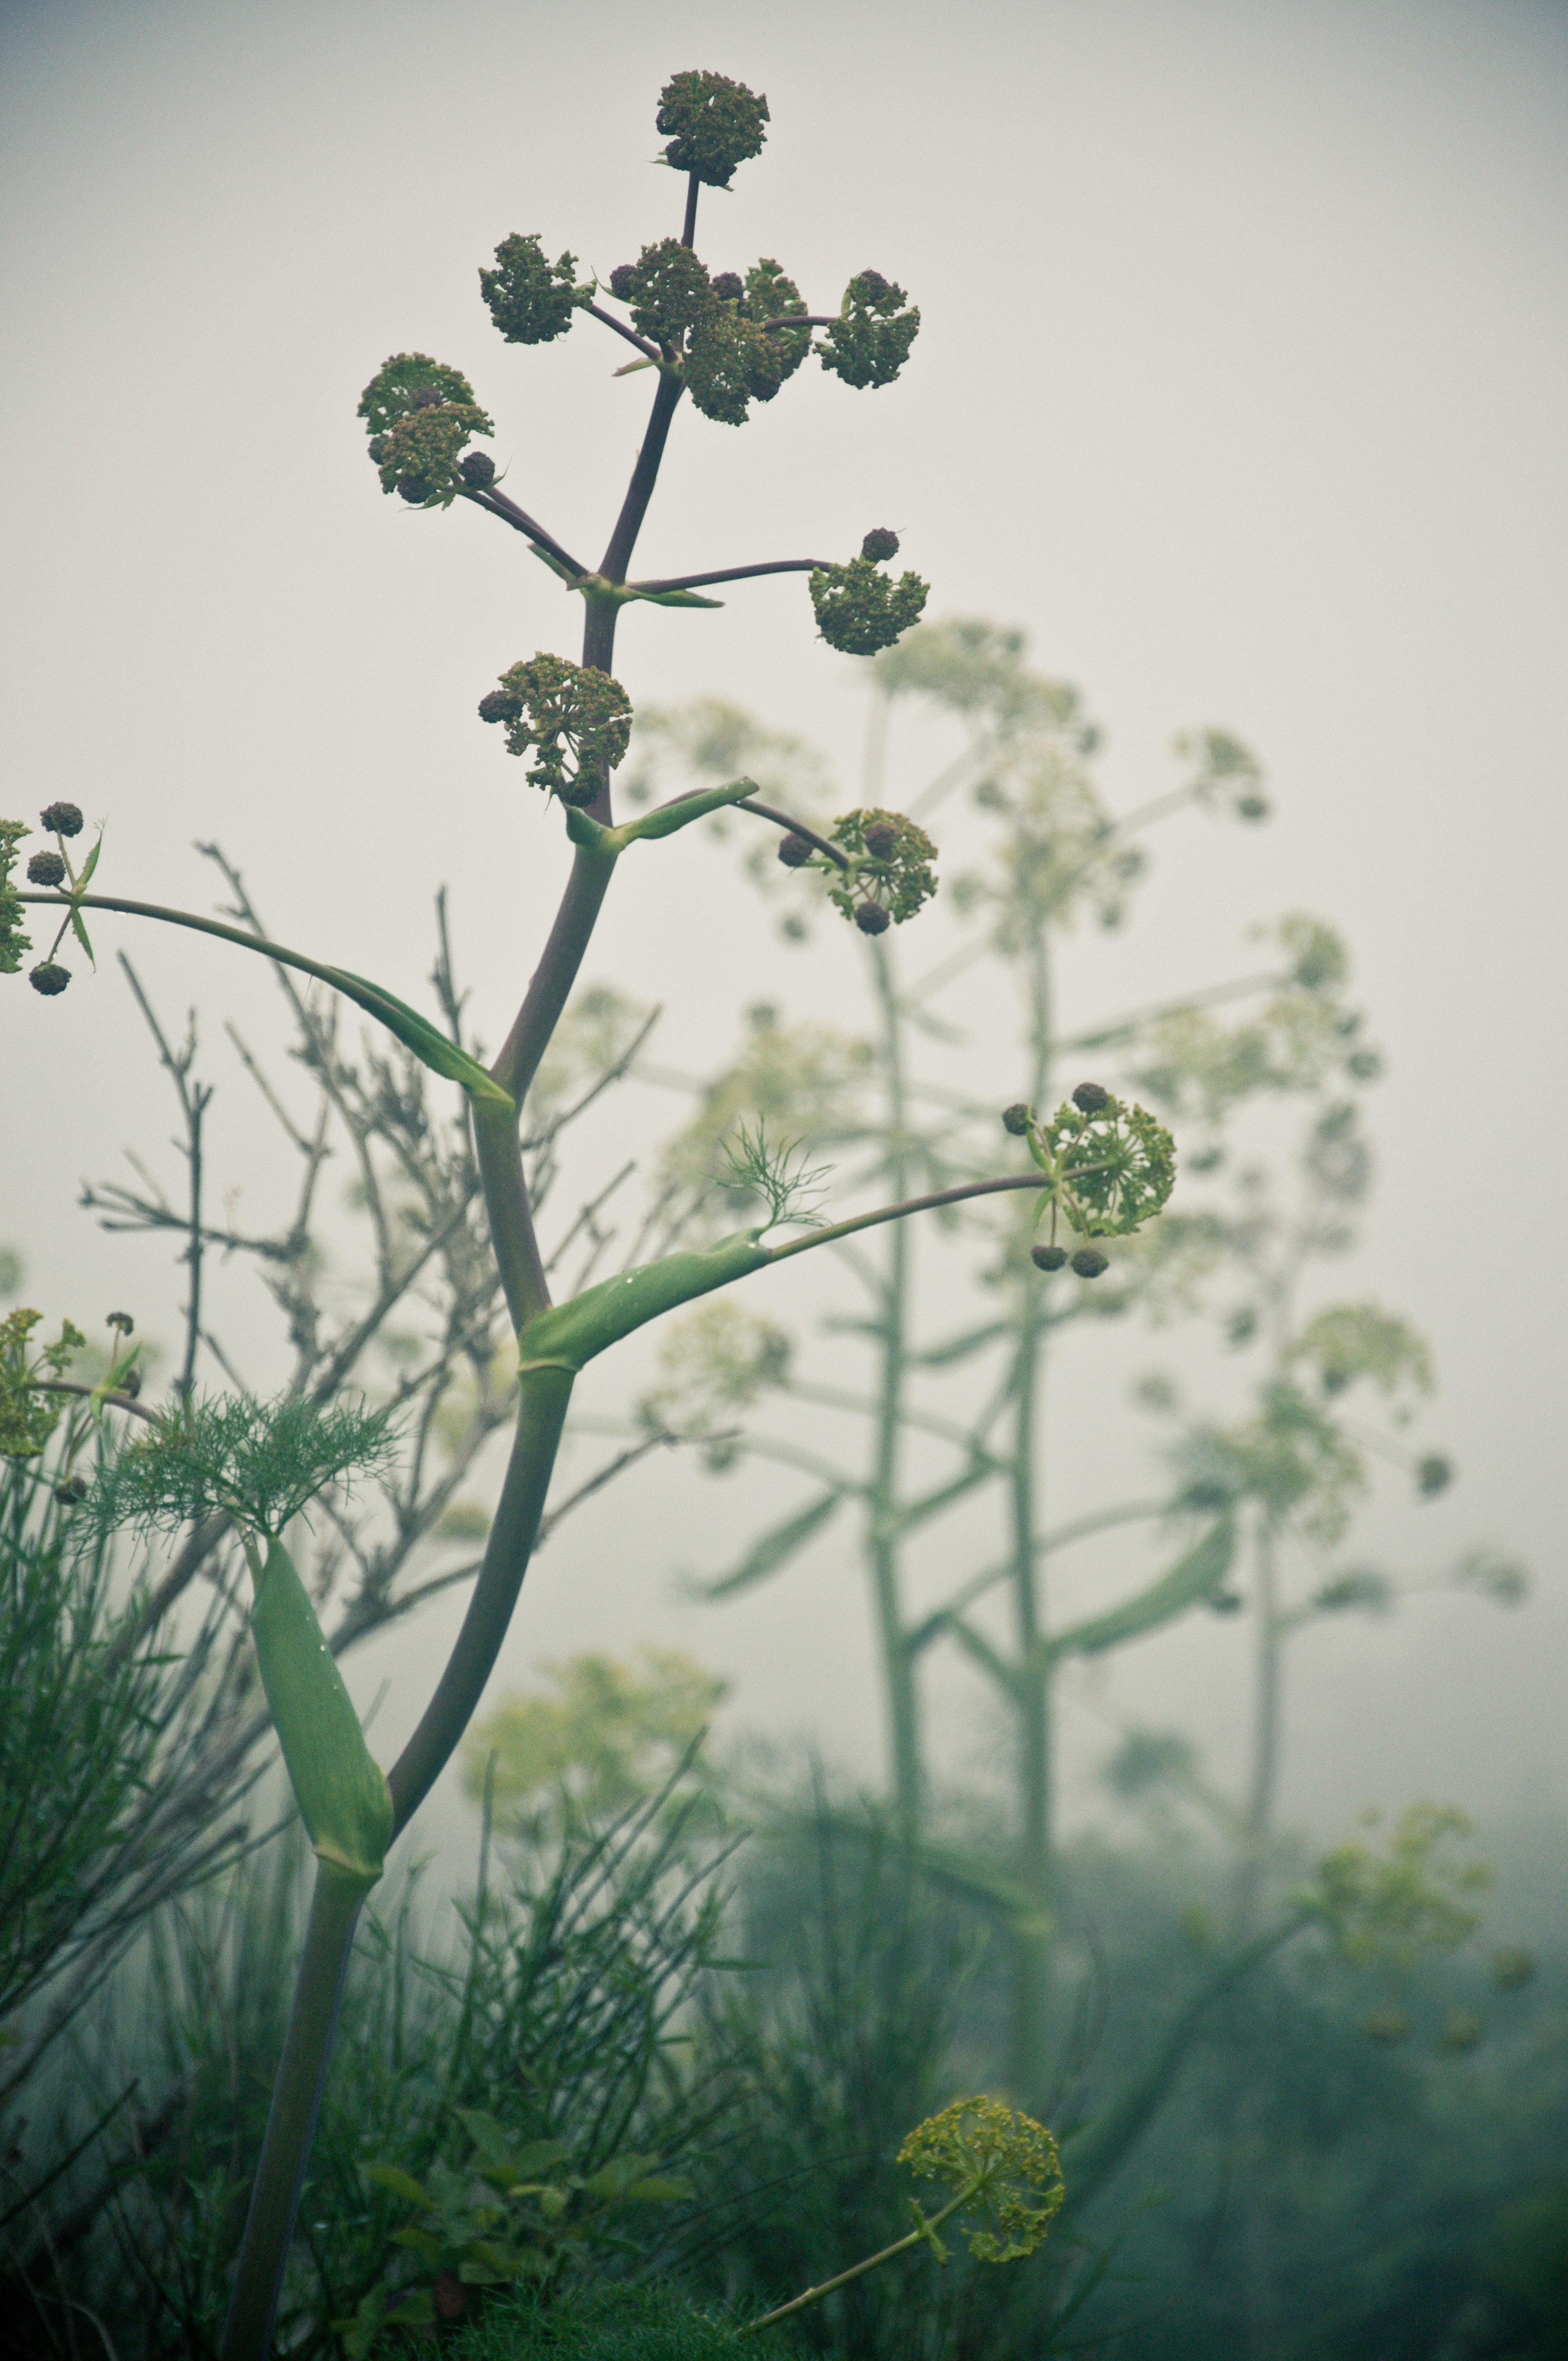 Plants in the mist photo